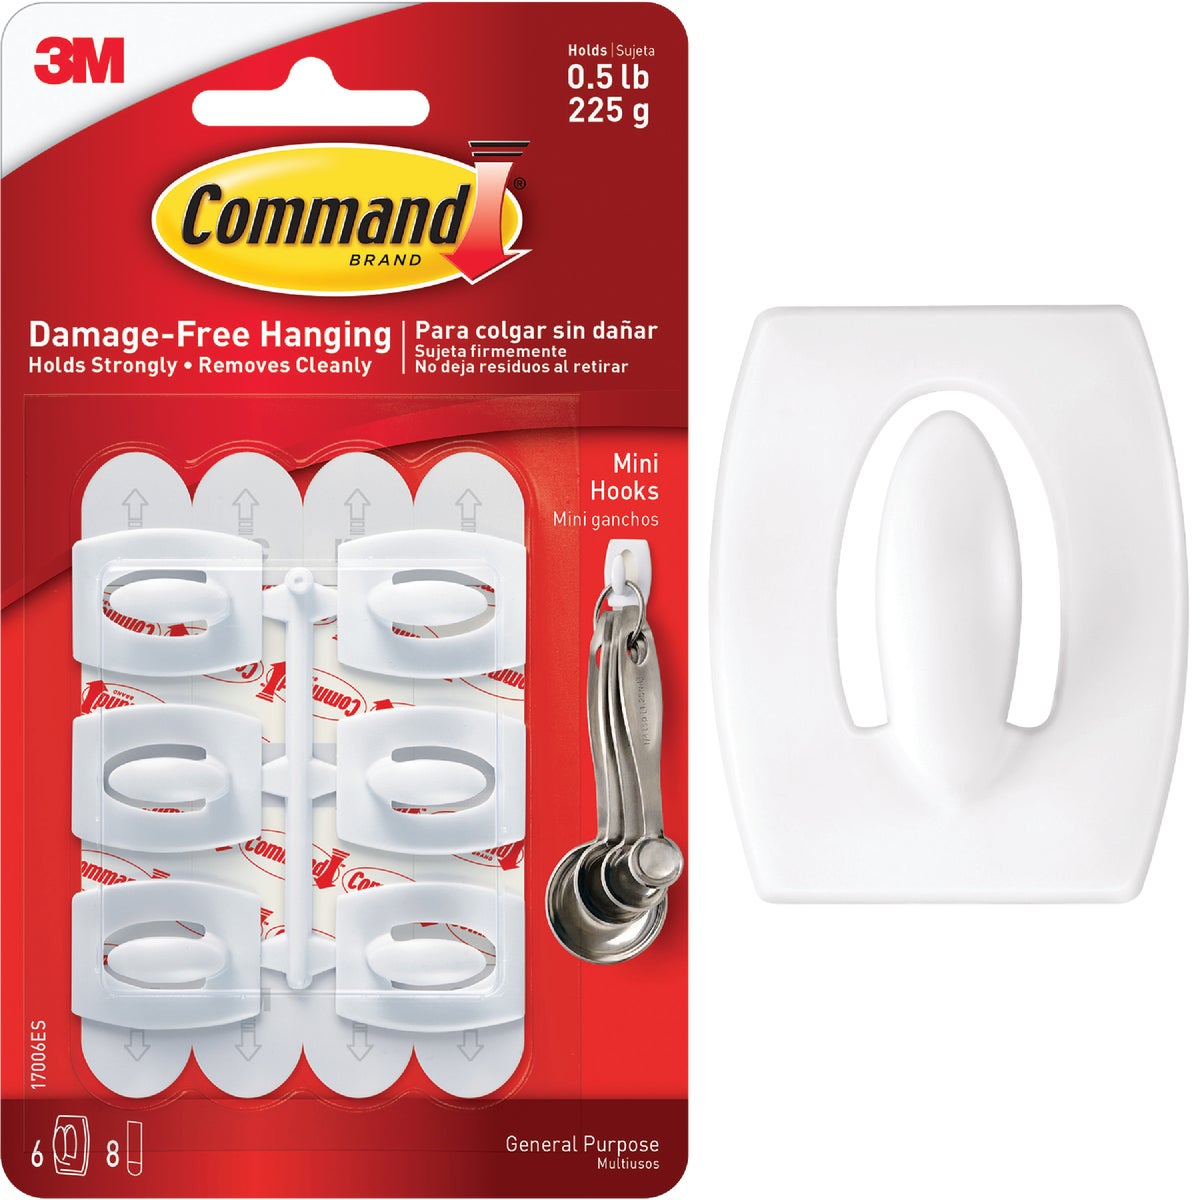 Item 601735, Forget about nails, screws and tacks, Command Clear Hooks are fast and easy